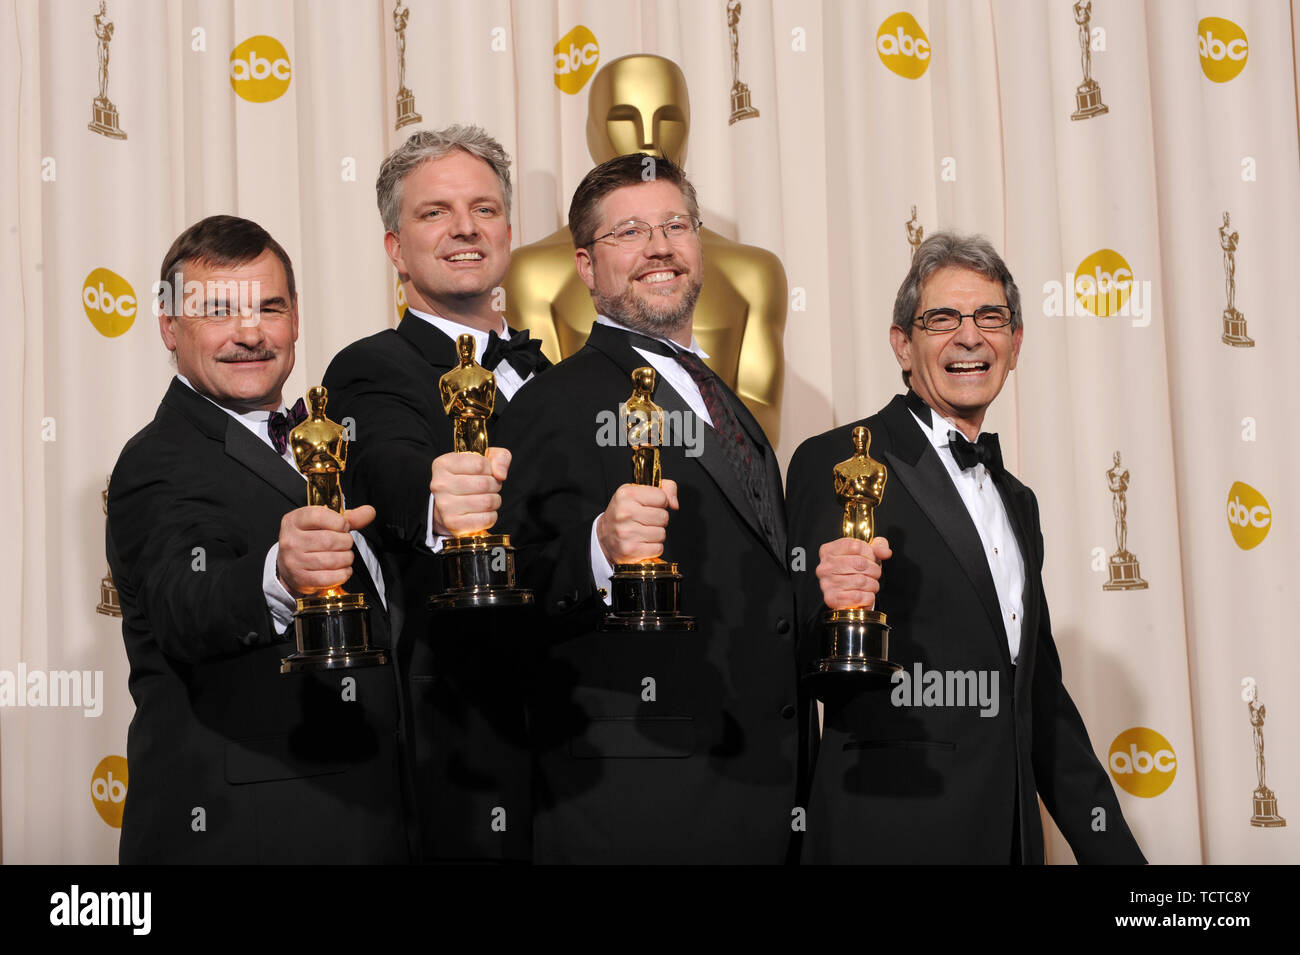 LOS ANGELES, CA. February 24, 2008: Michael Fink & Bill Westenhofer & Ben Morris & Trevor Wood at the 80th Annual Academy Awards at the Kodak Theatre, Hollywood. © 2008 Paul Smith / Featureflash Stock Photo